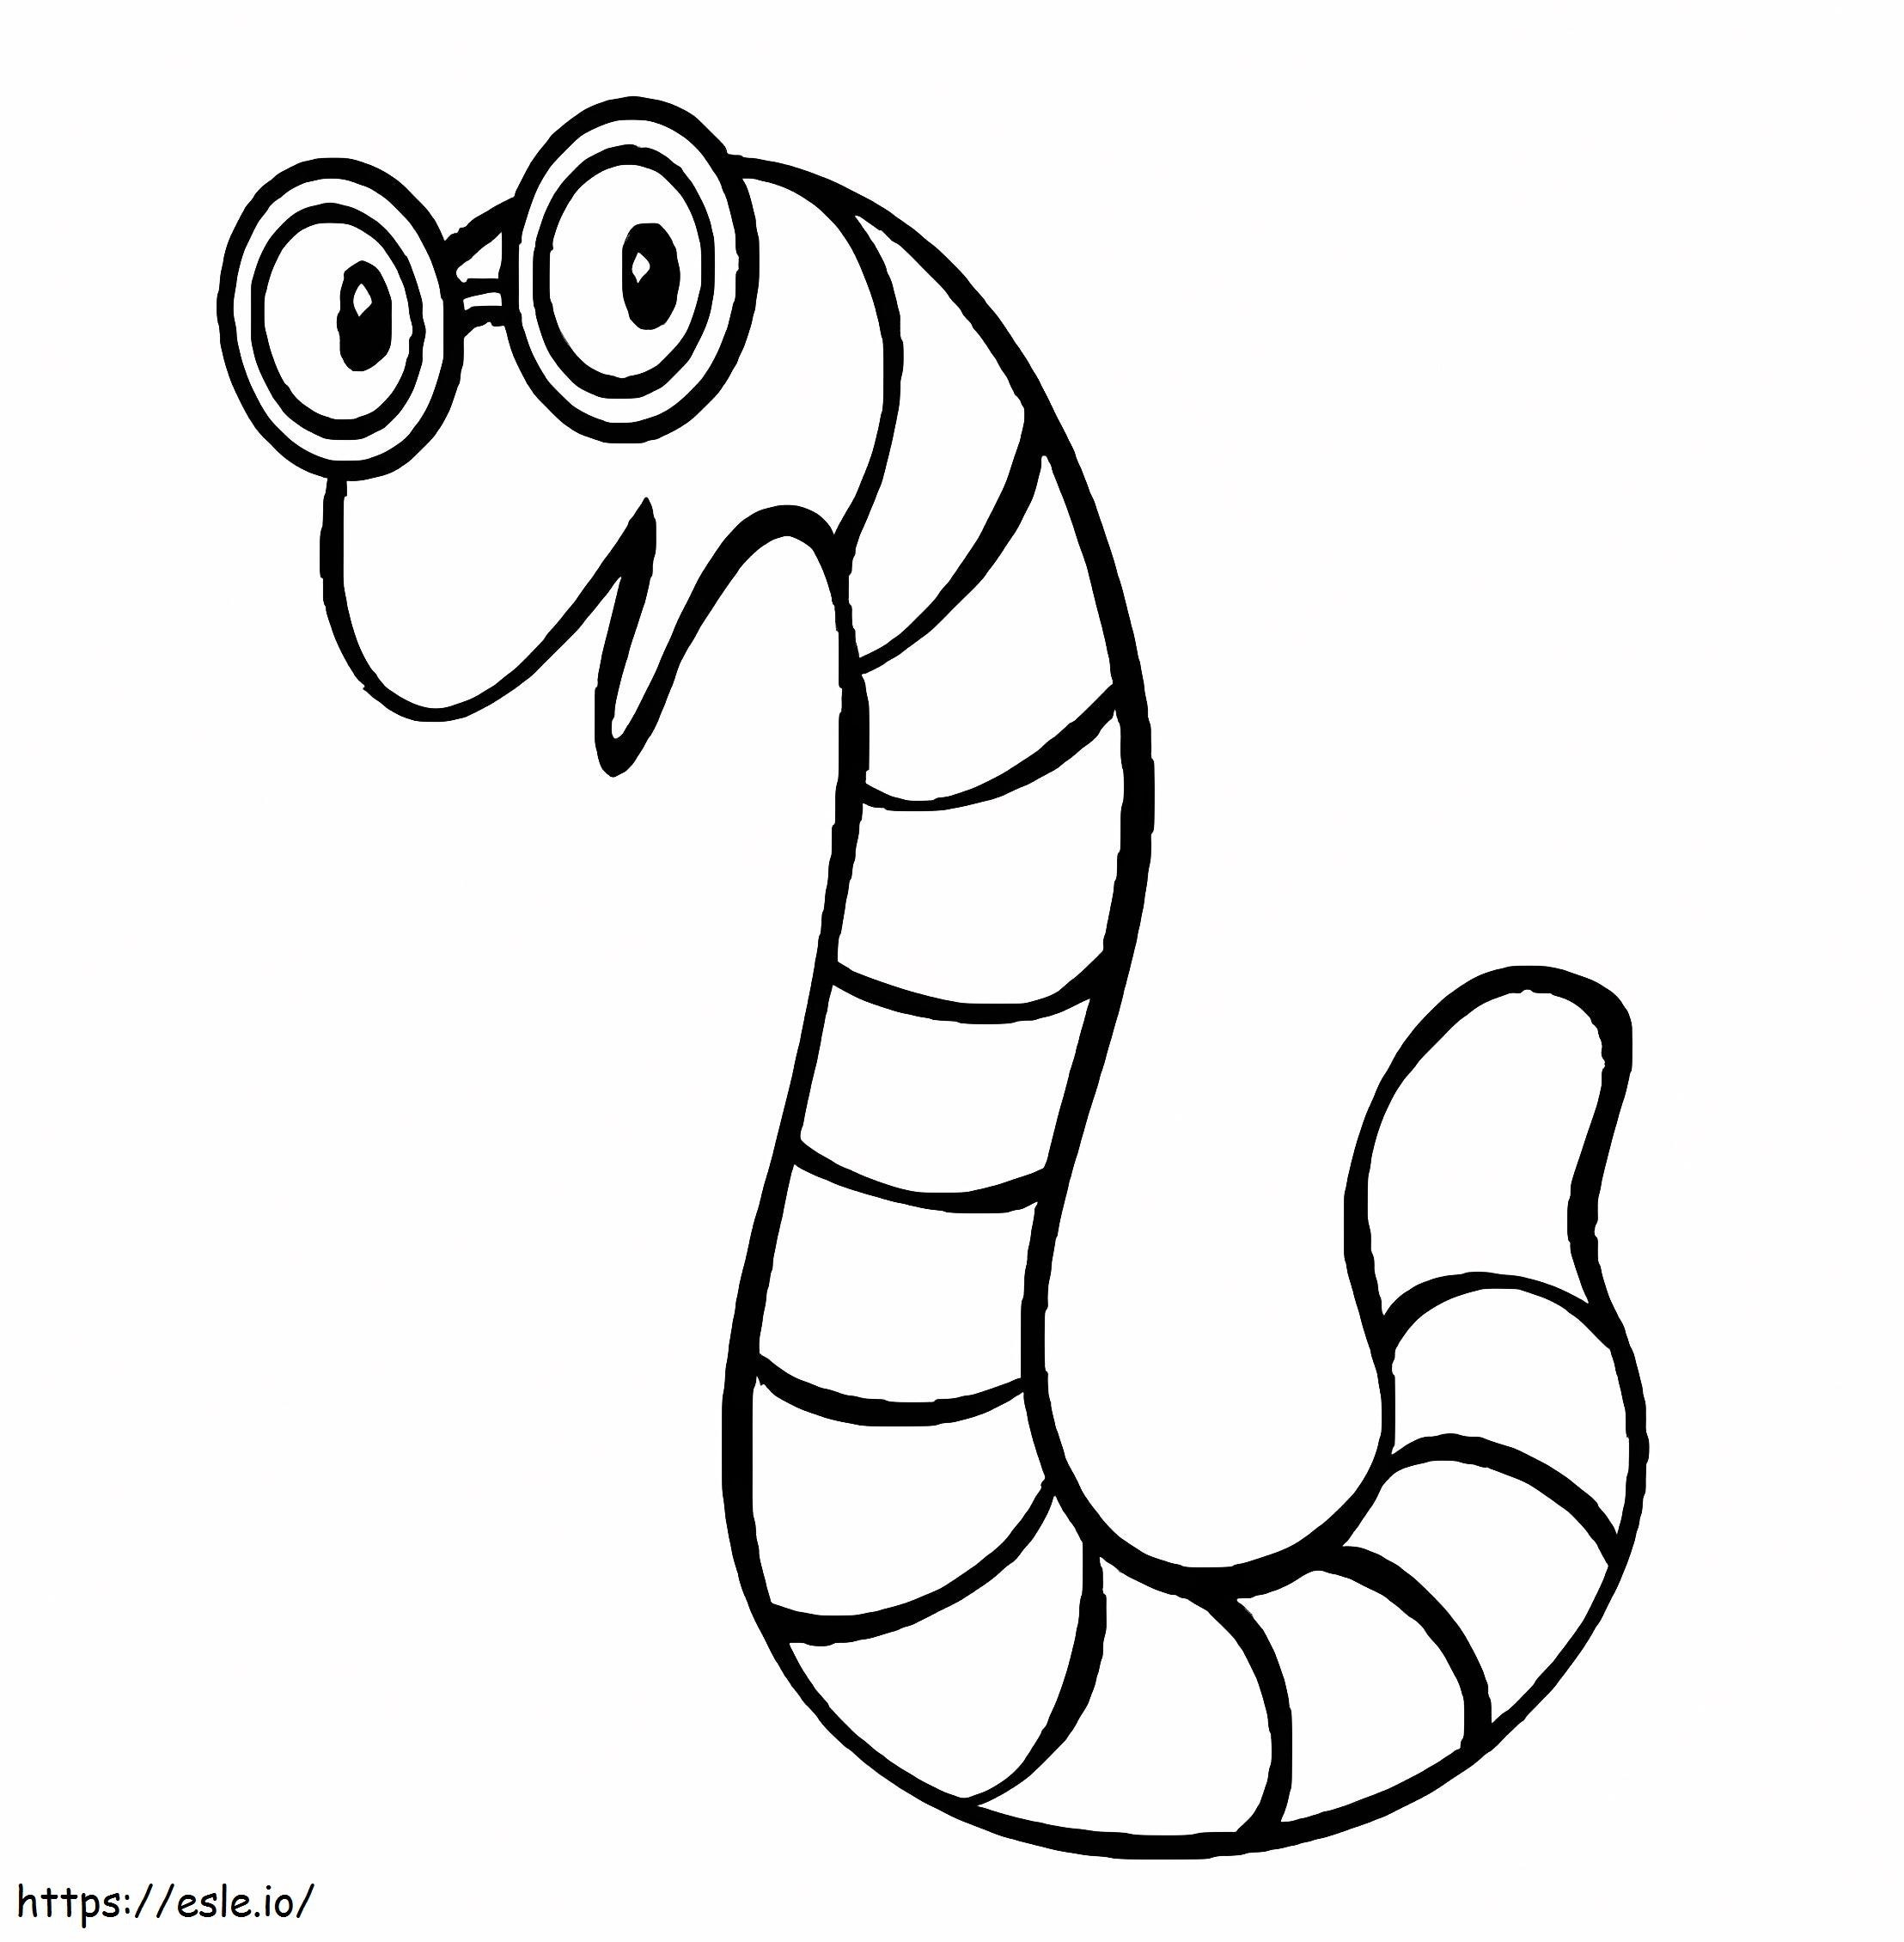 Normal Worms coloring page